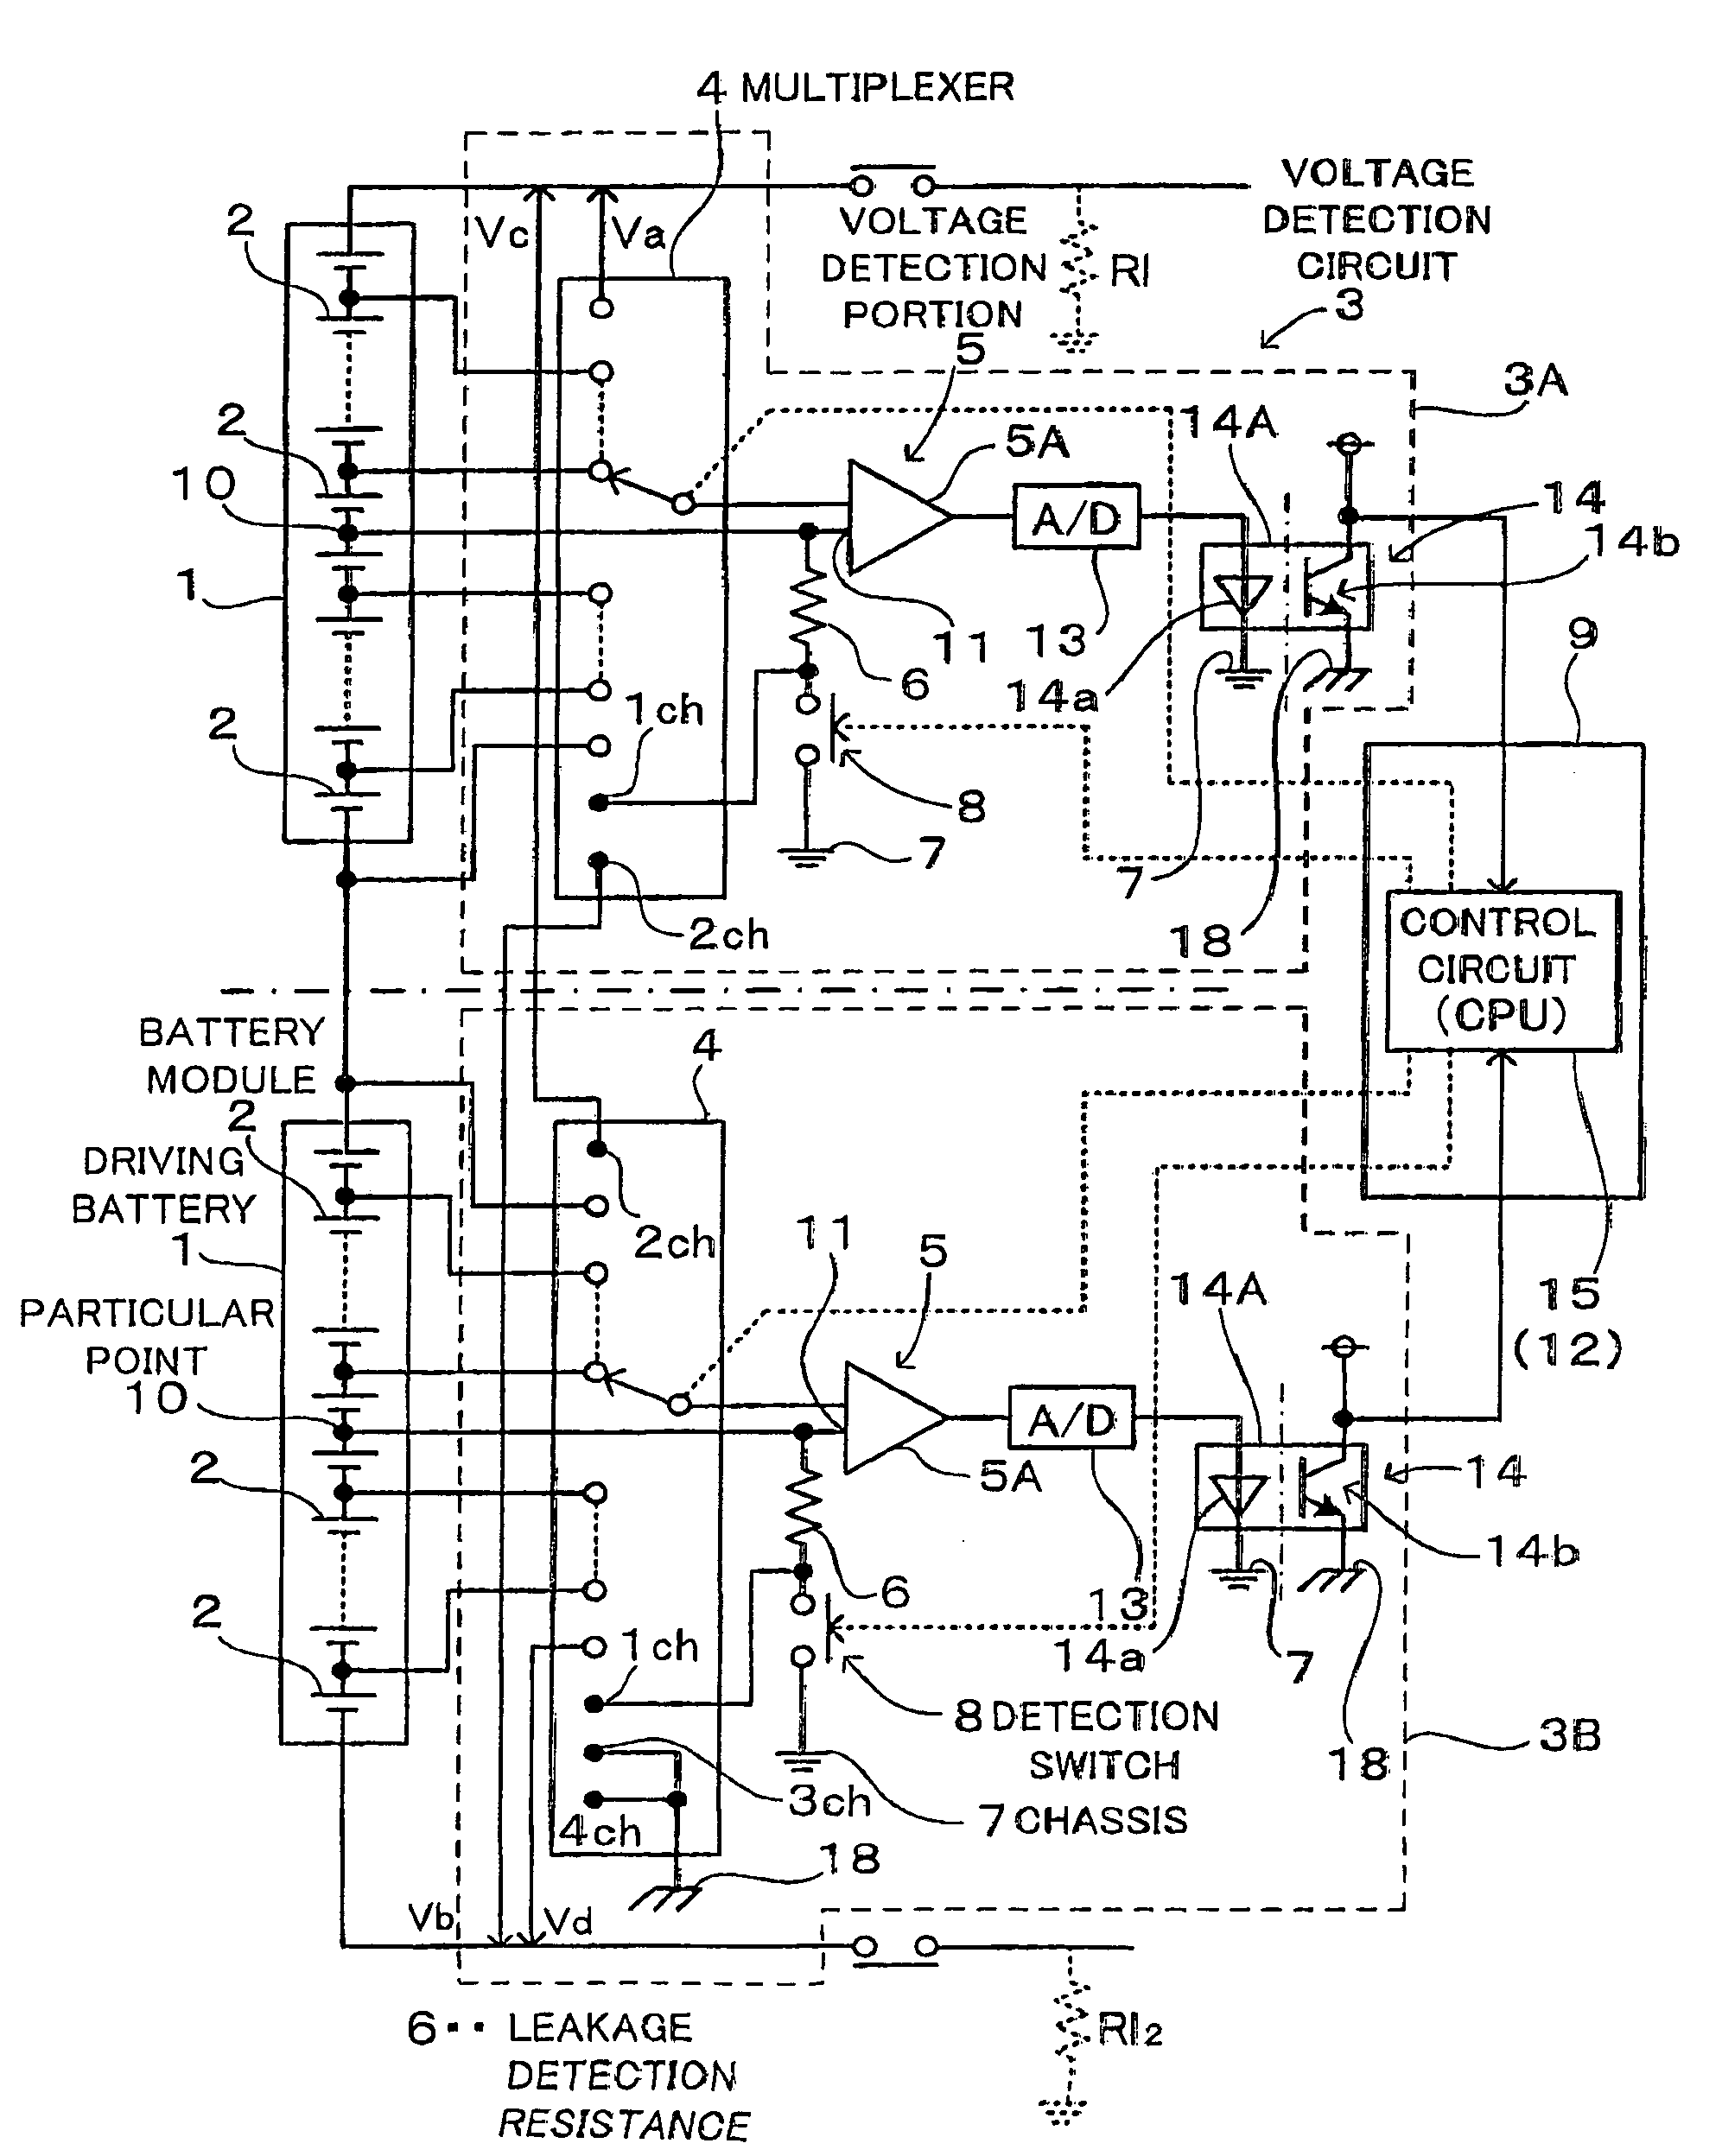 Leakage detector for a power supply apparatus for a vehicle